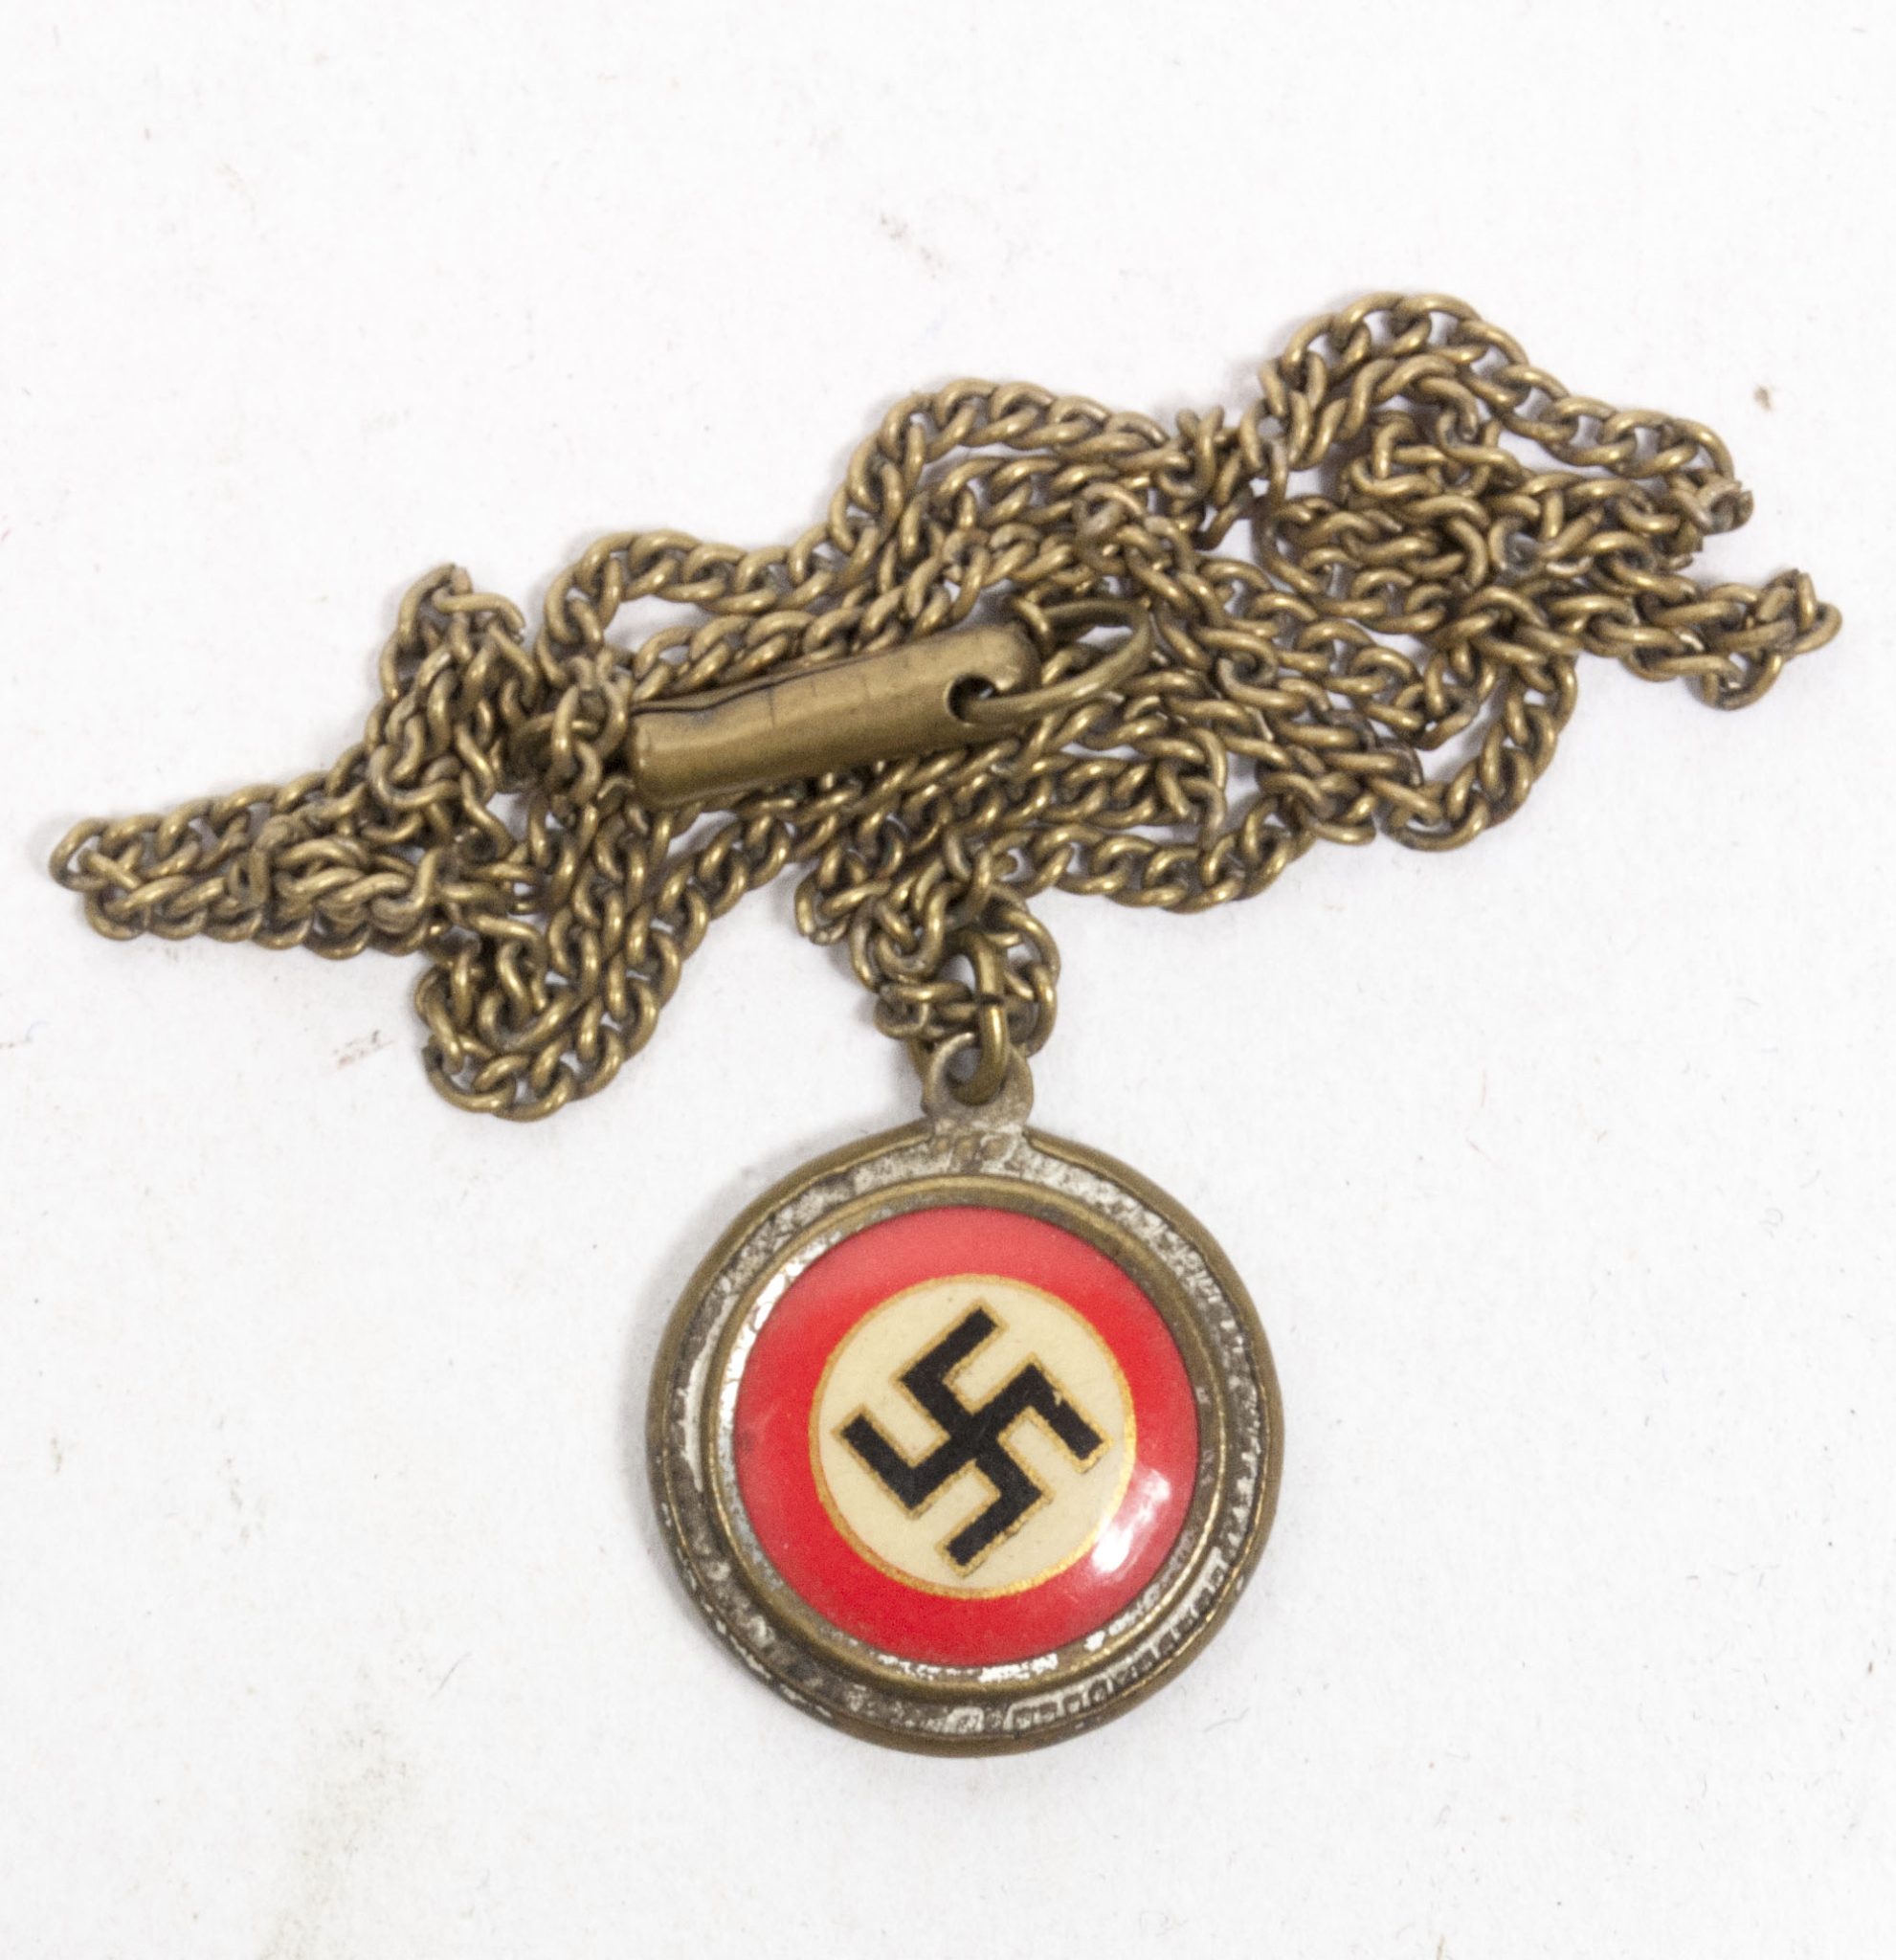 NSDAP Sympathisers badge on necklace - very rare